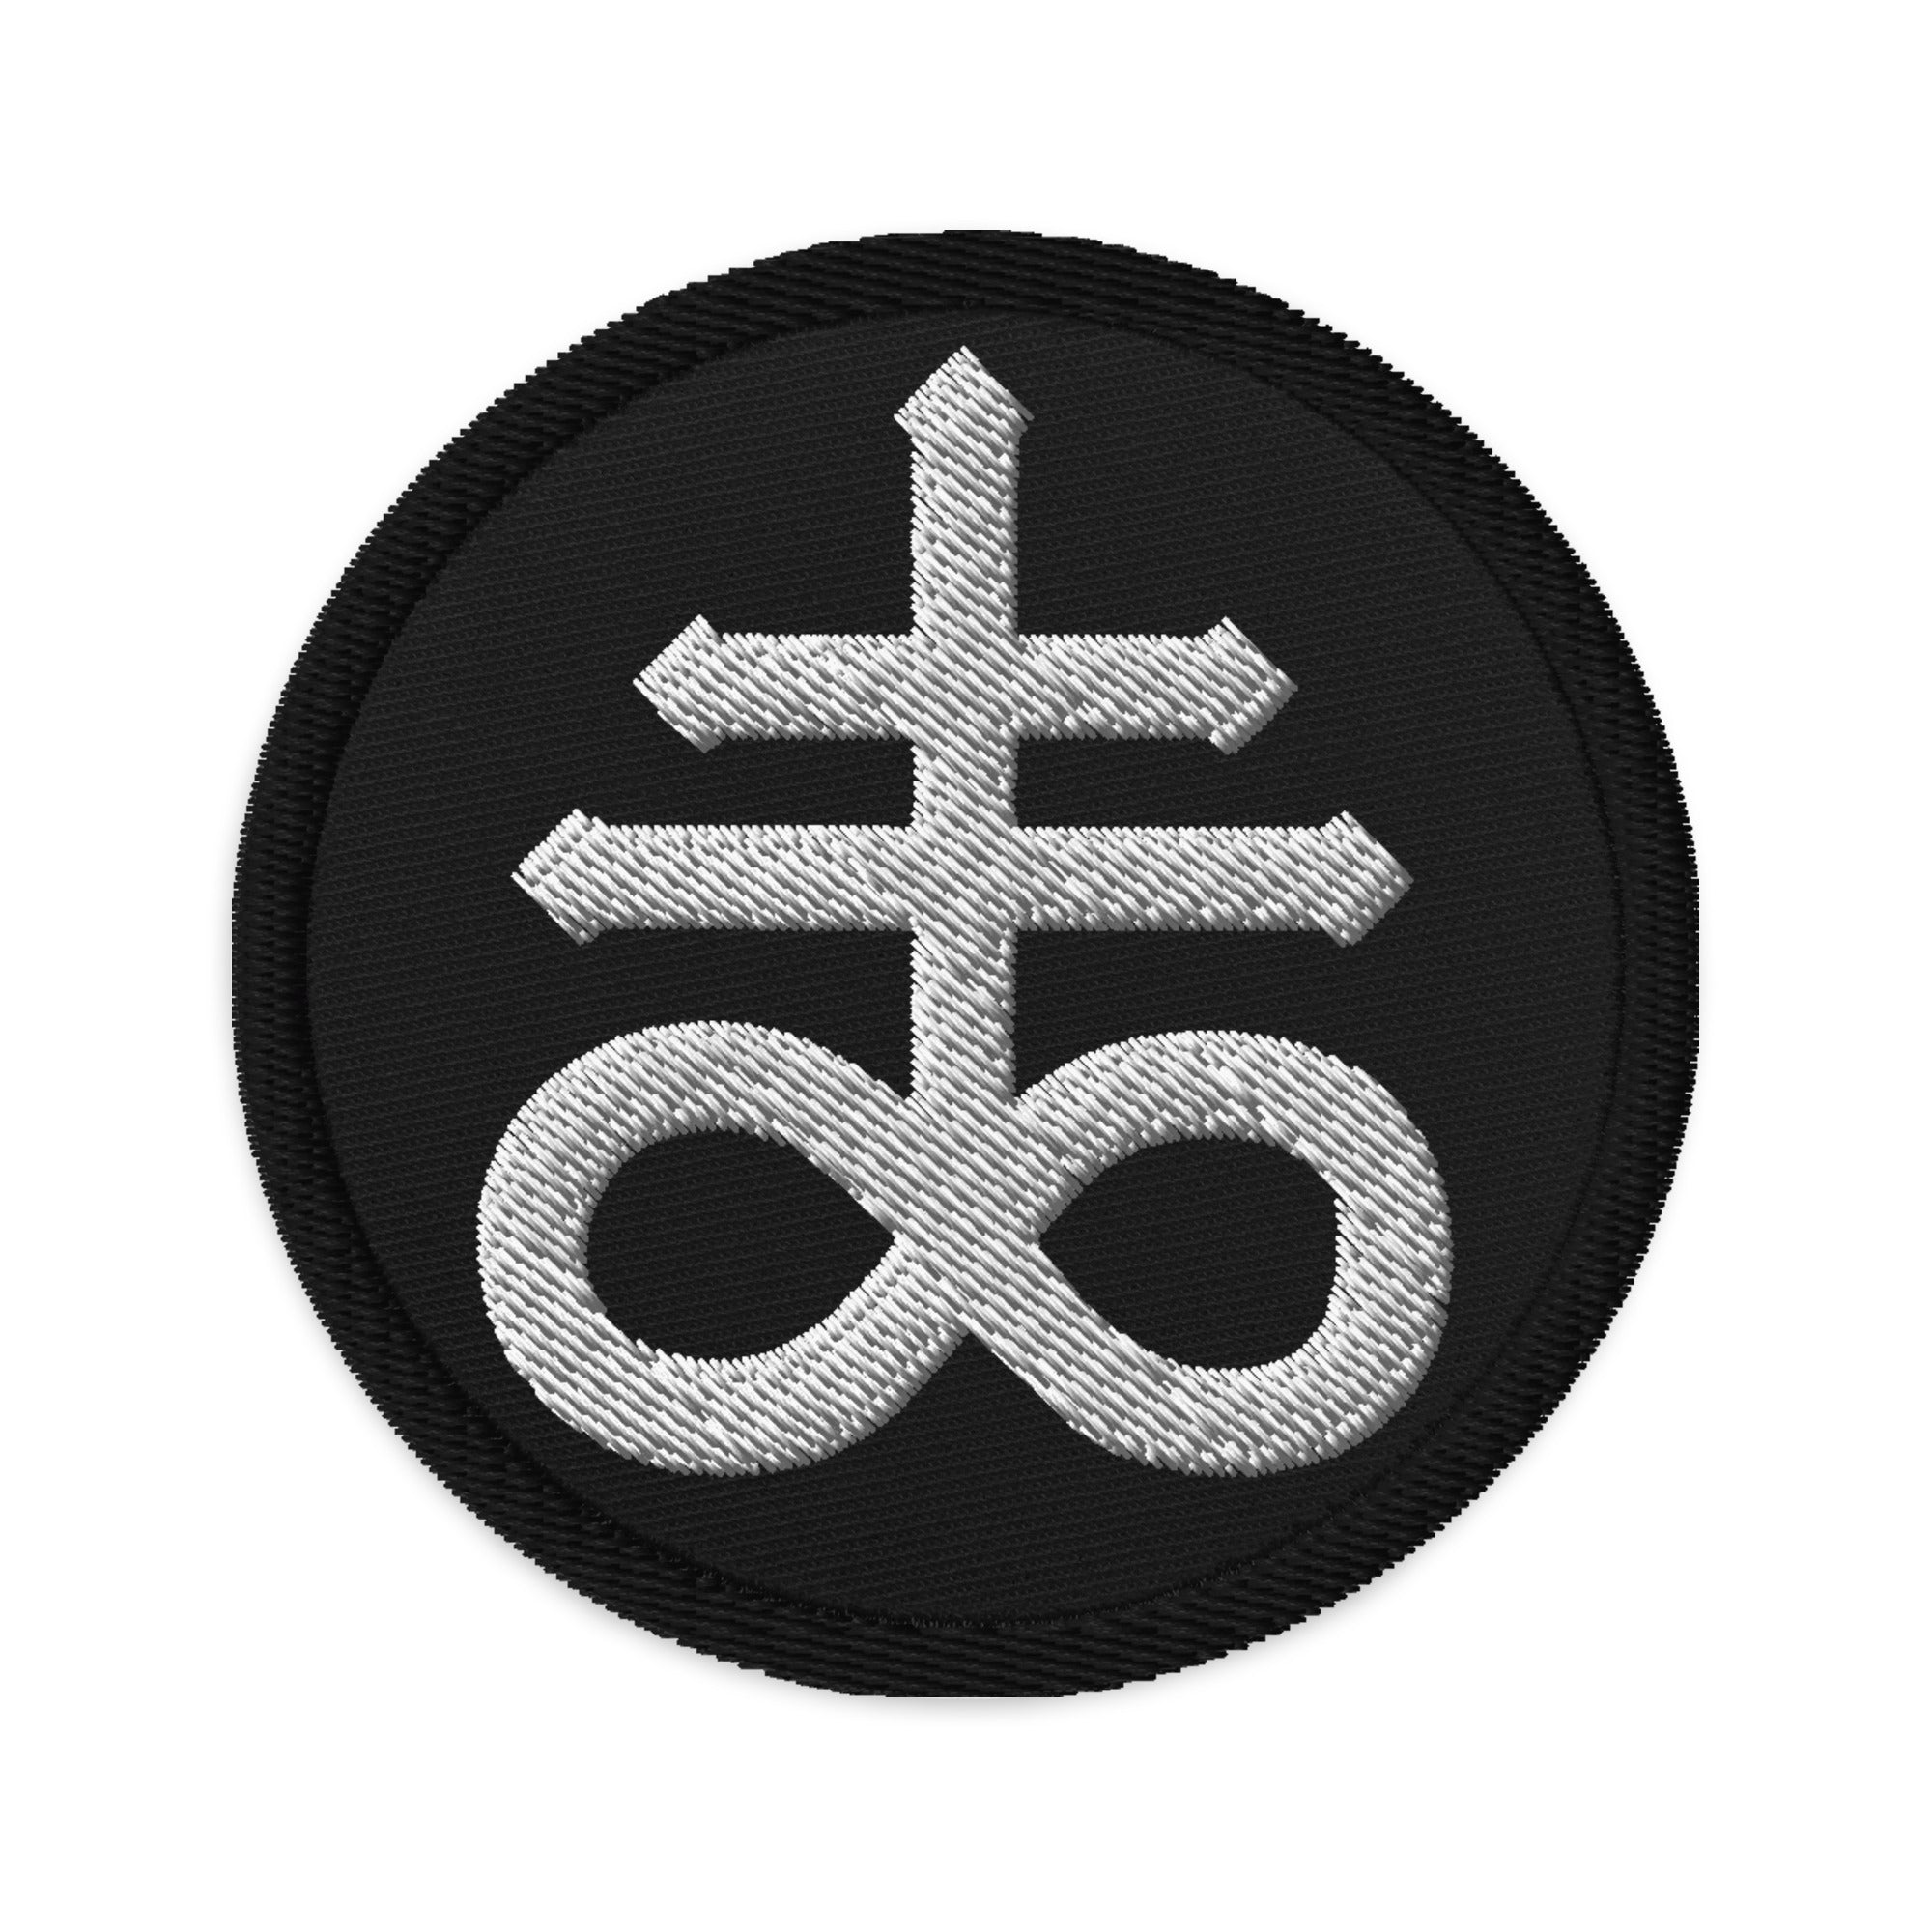 The Leviathan Cross of Satan Occult Symbol Embroidered Patch Black Sulfur White Thread - Edge of Life Designs